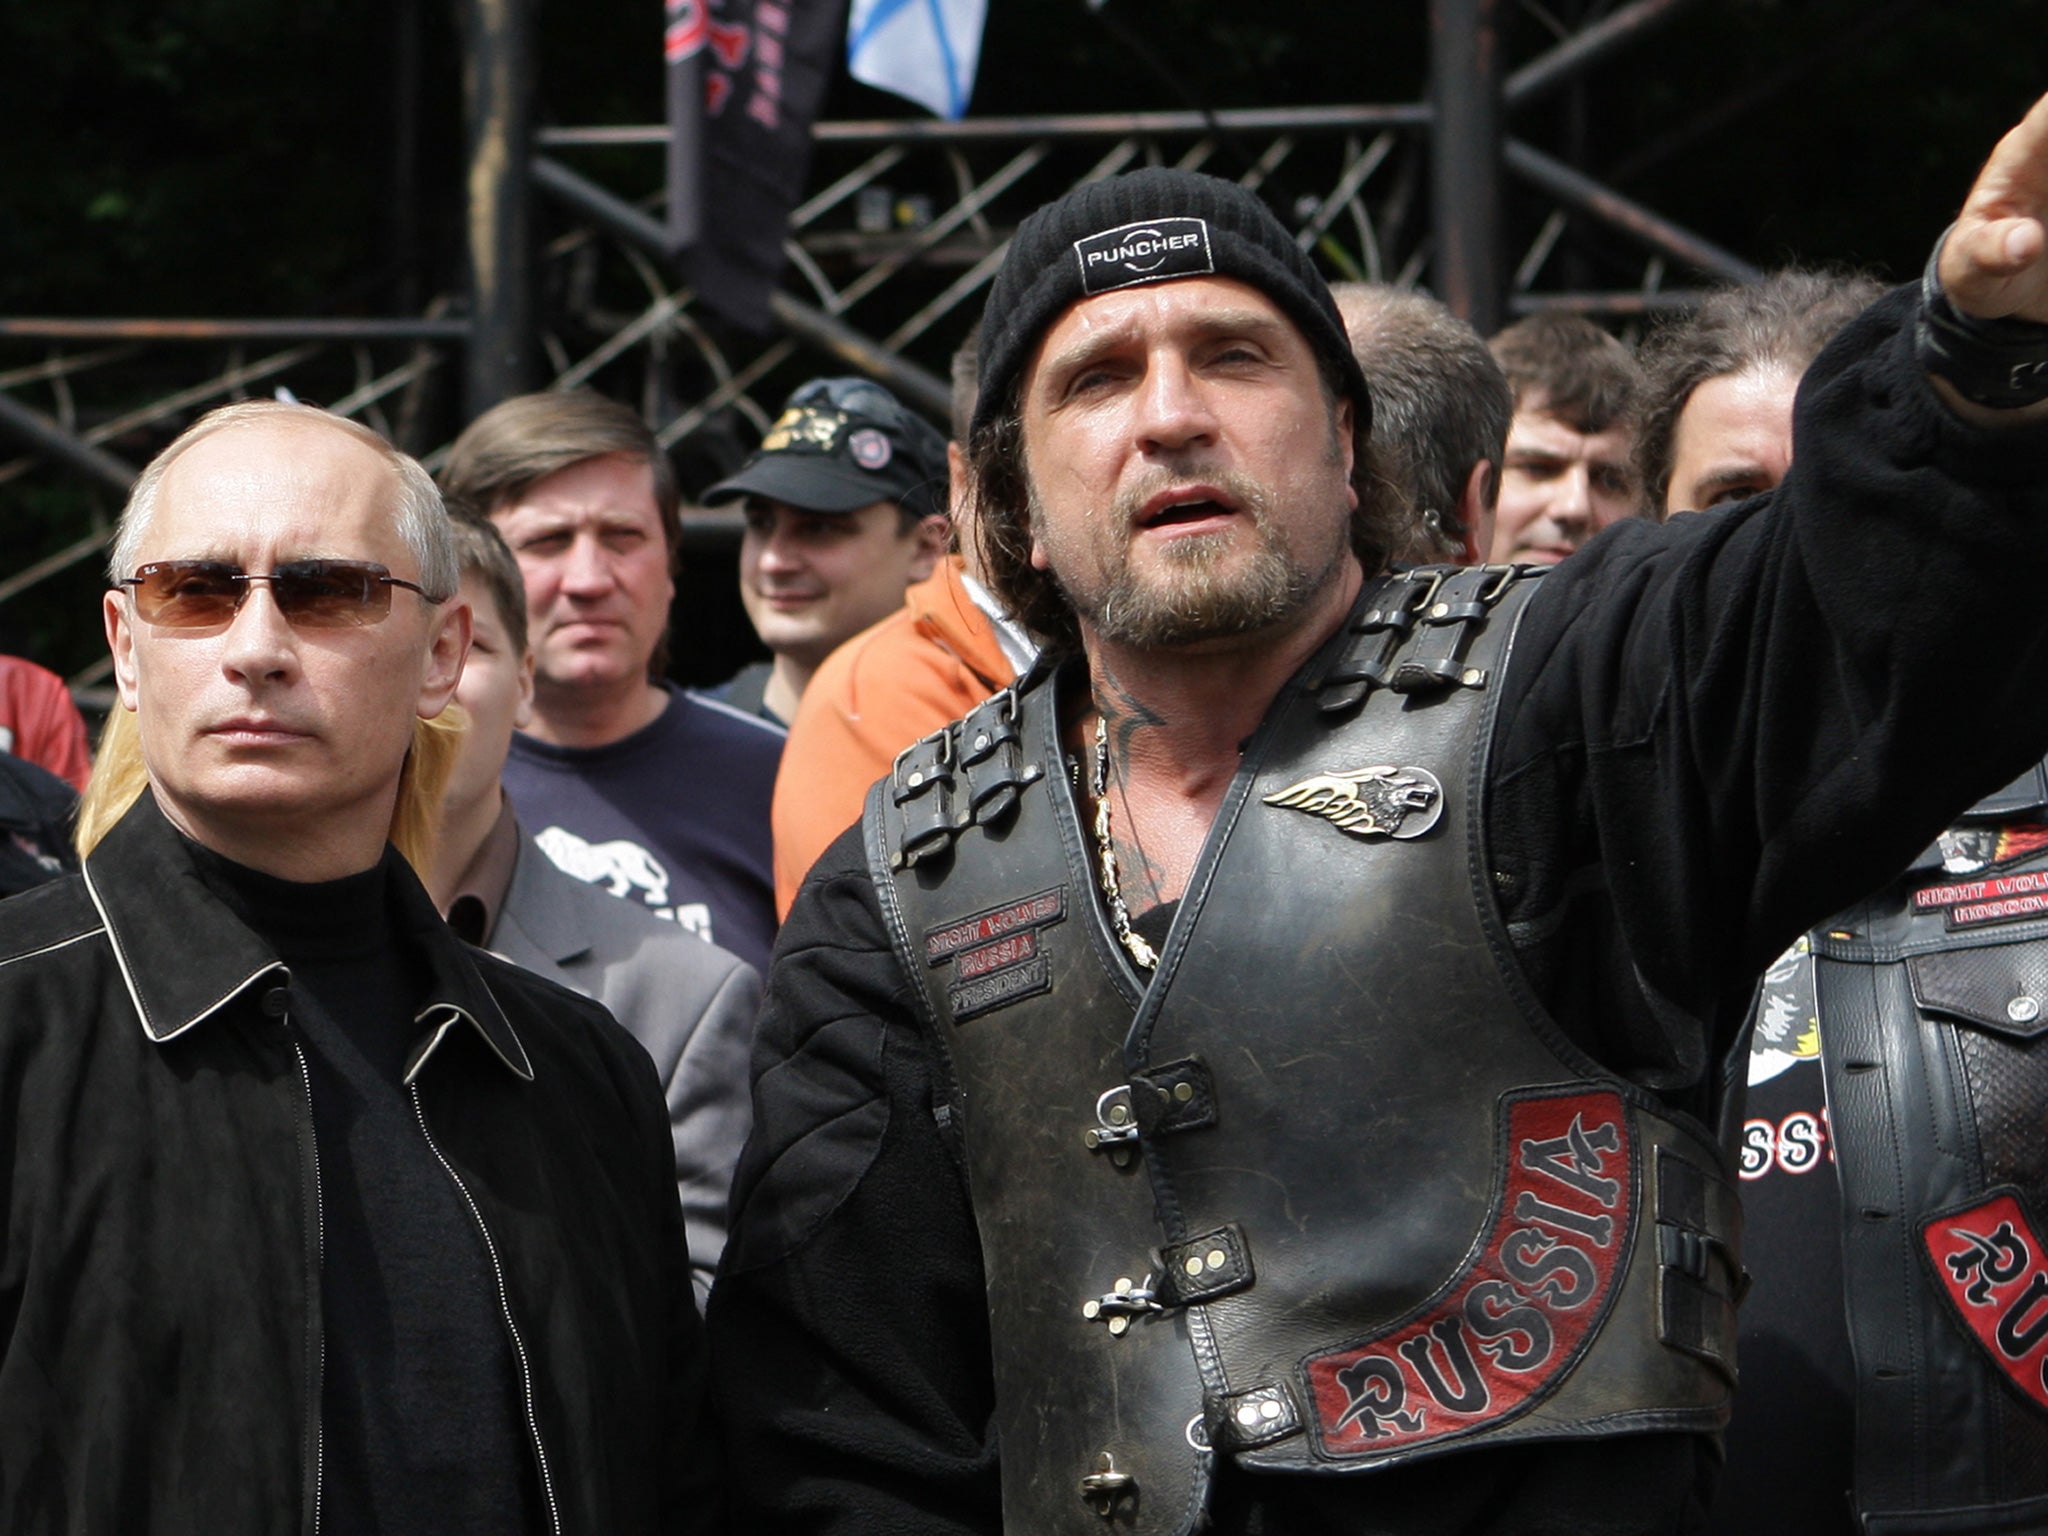 Night Wolves Pro Putin Biker Gang Sparks Anger With Plans To Ride Across Europe The